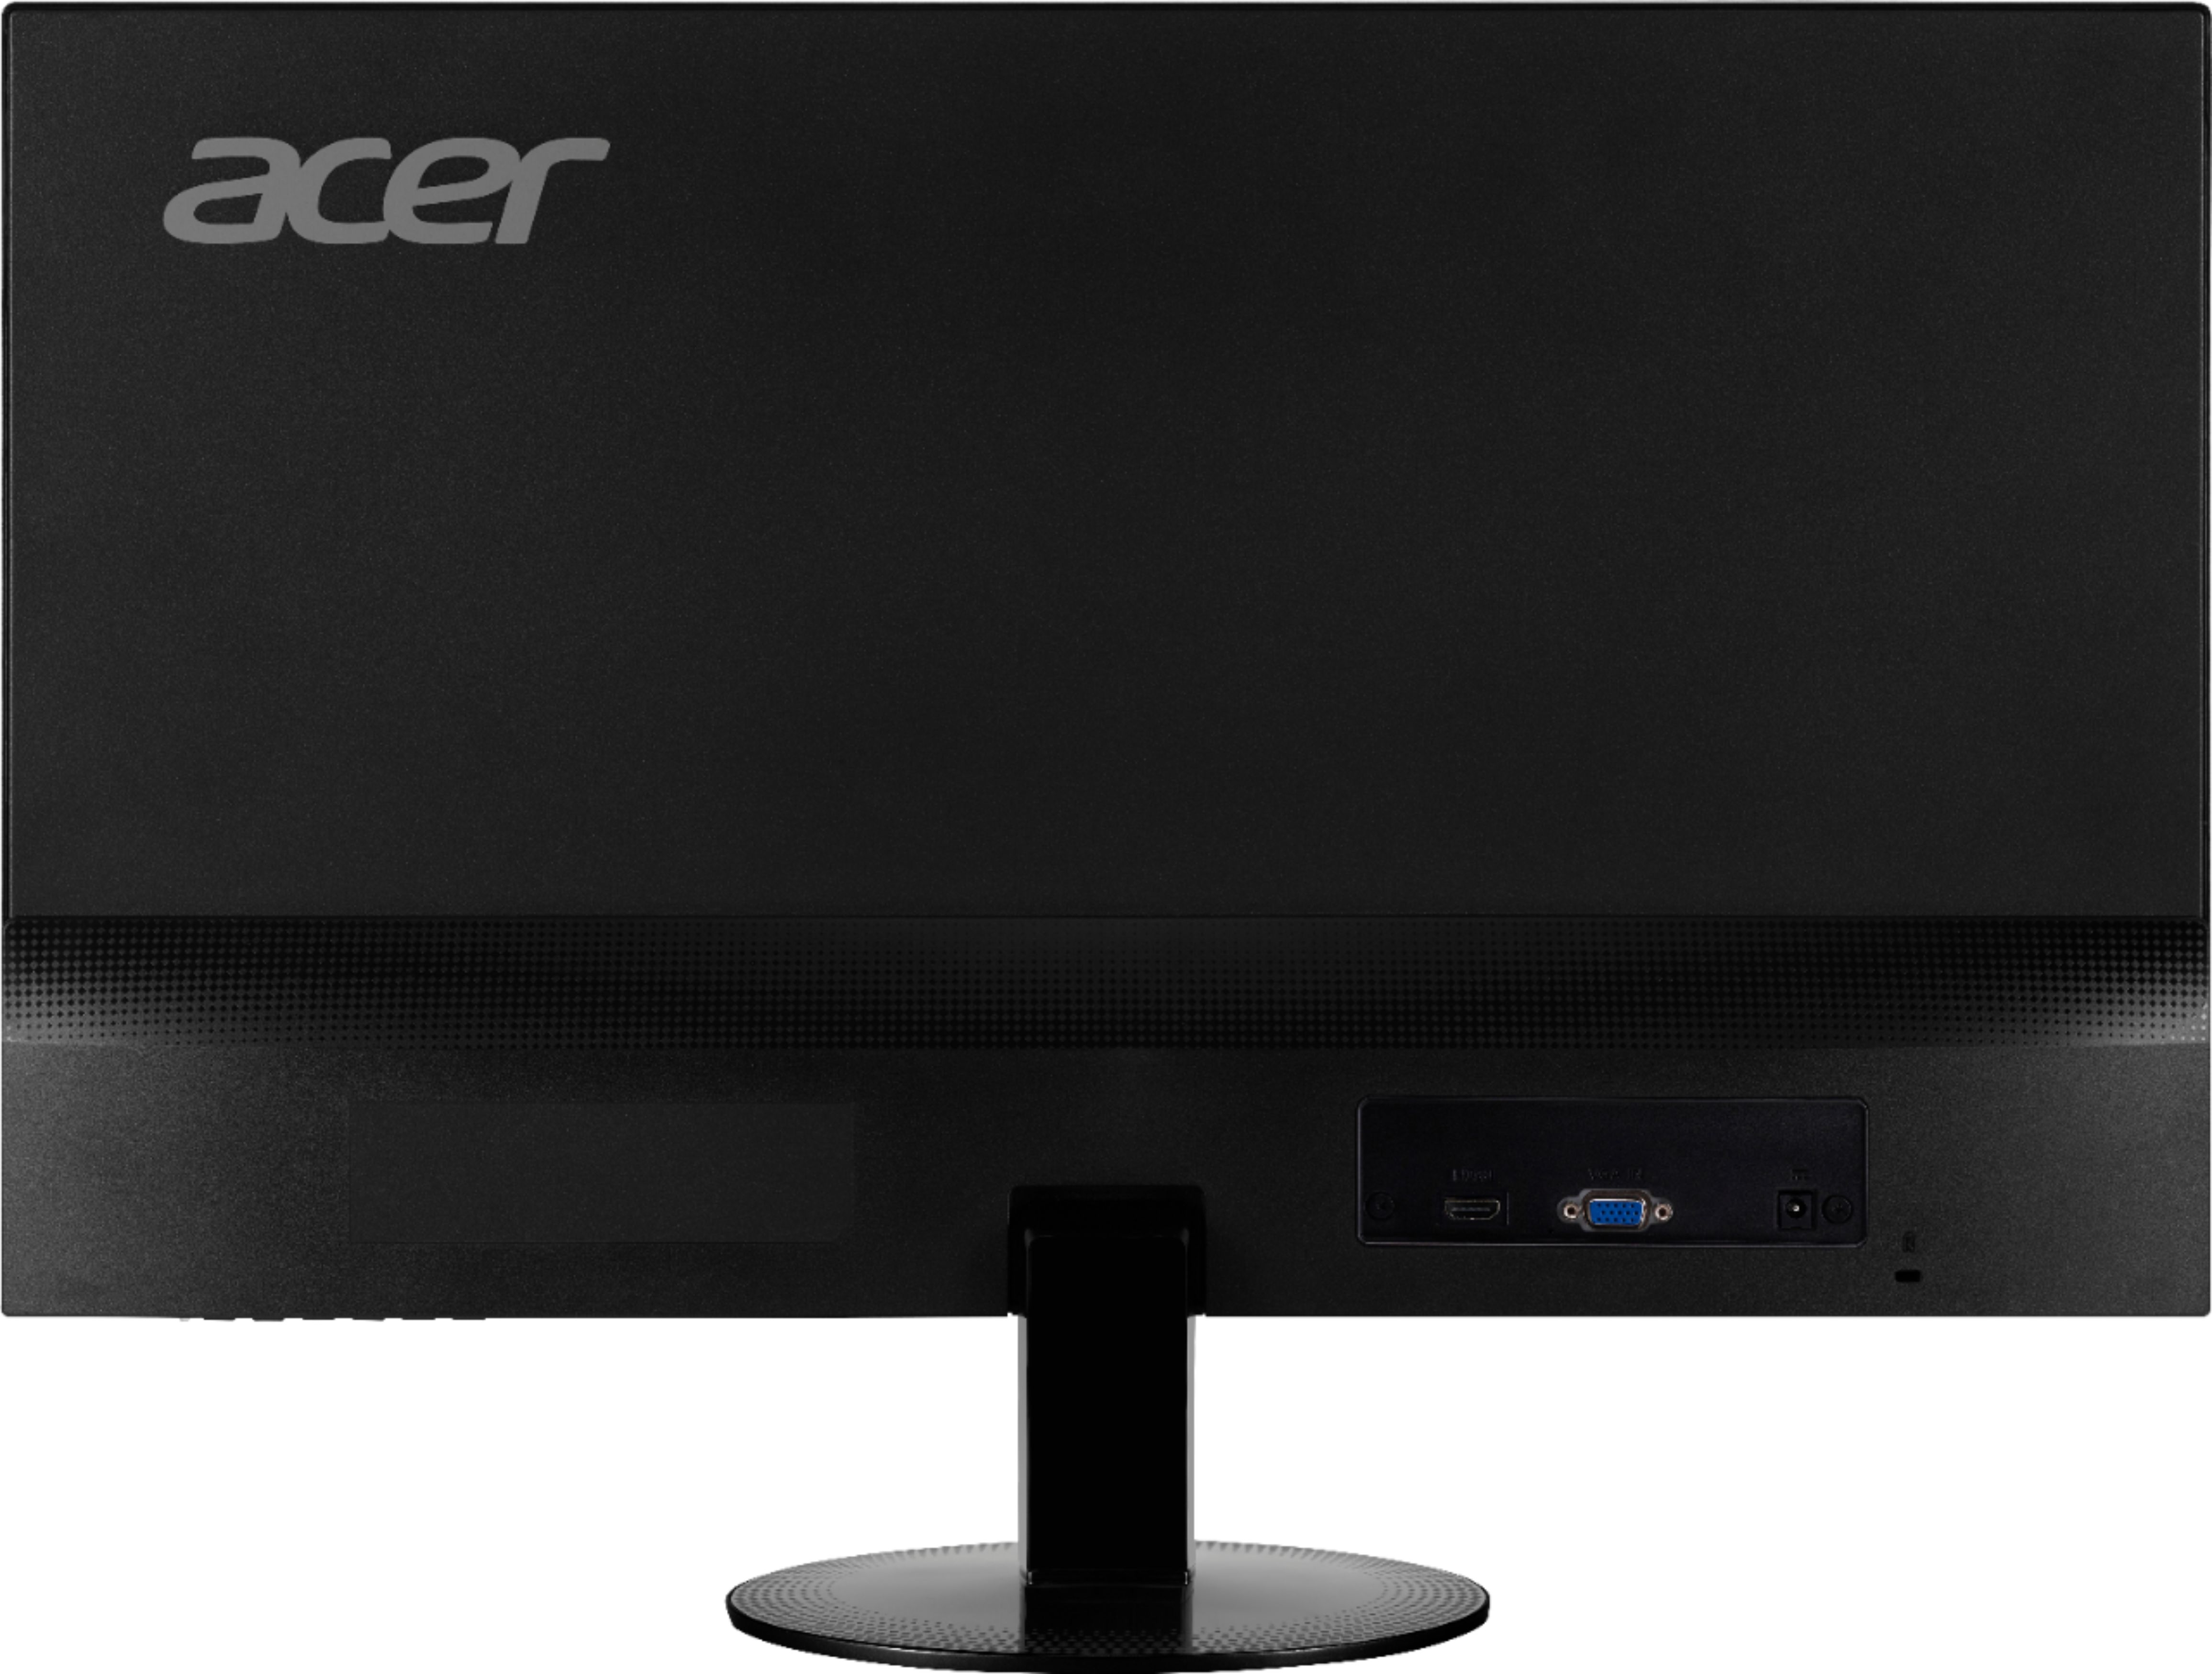 Back View: Acer B7 - 23.8" Monitor Full HD 1920x1080 75Hz IPS 16:9 4ms 250Nit  - Refurbished